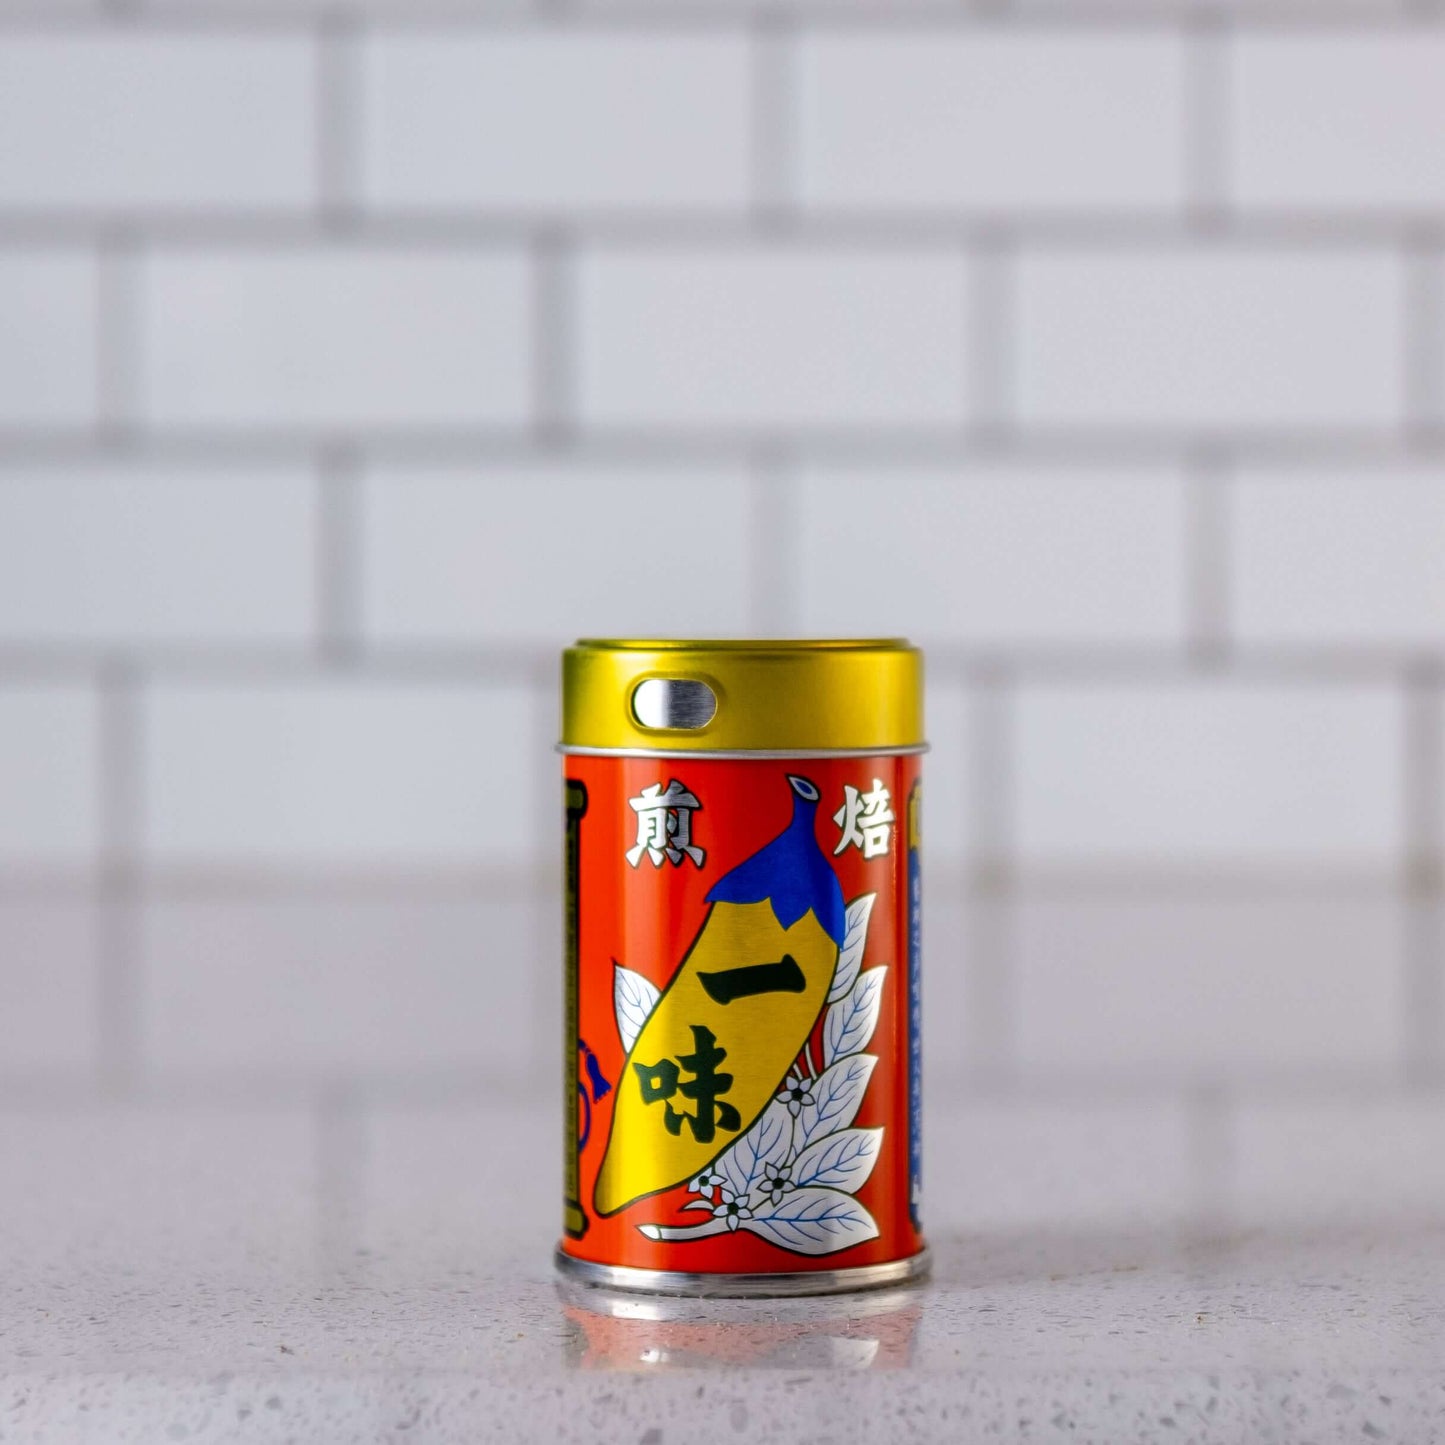 Togarashi (red pepper) canister on counter